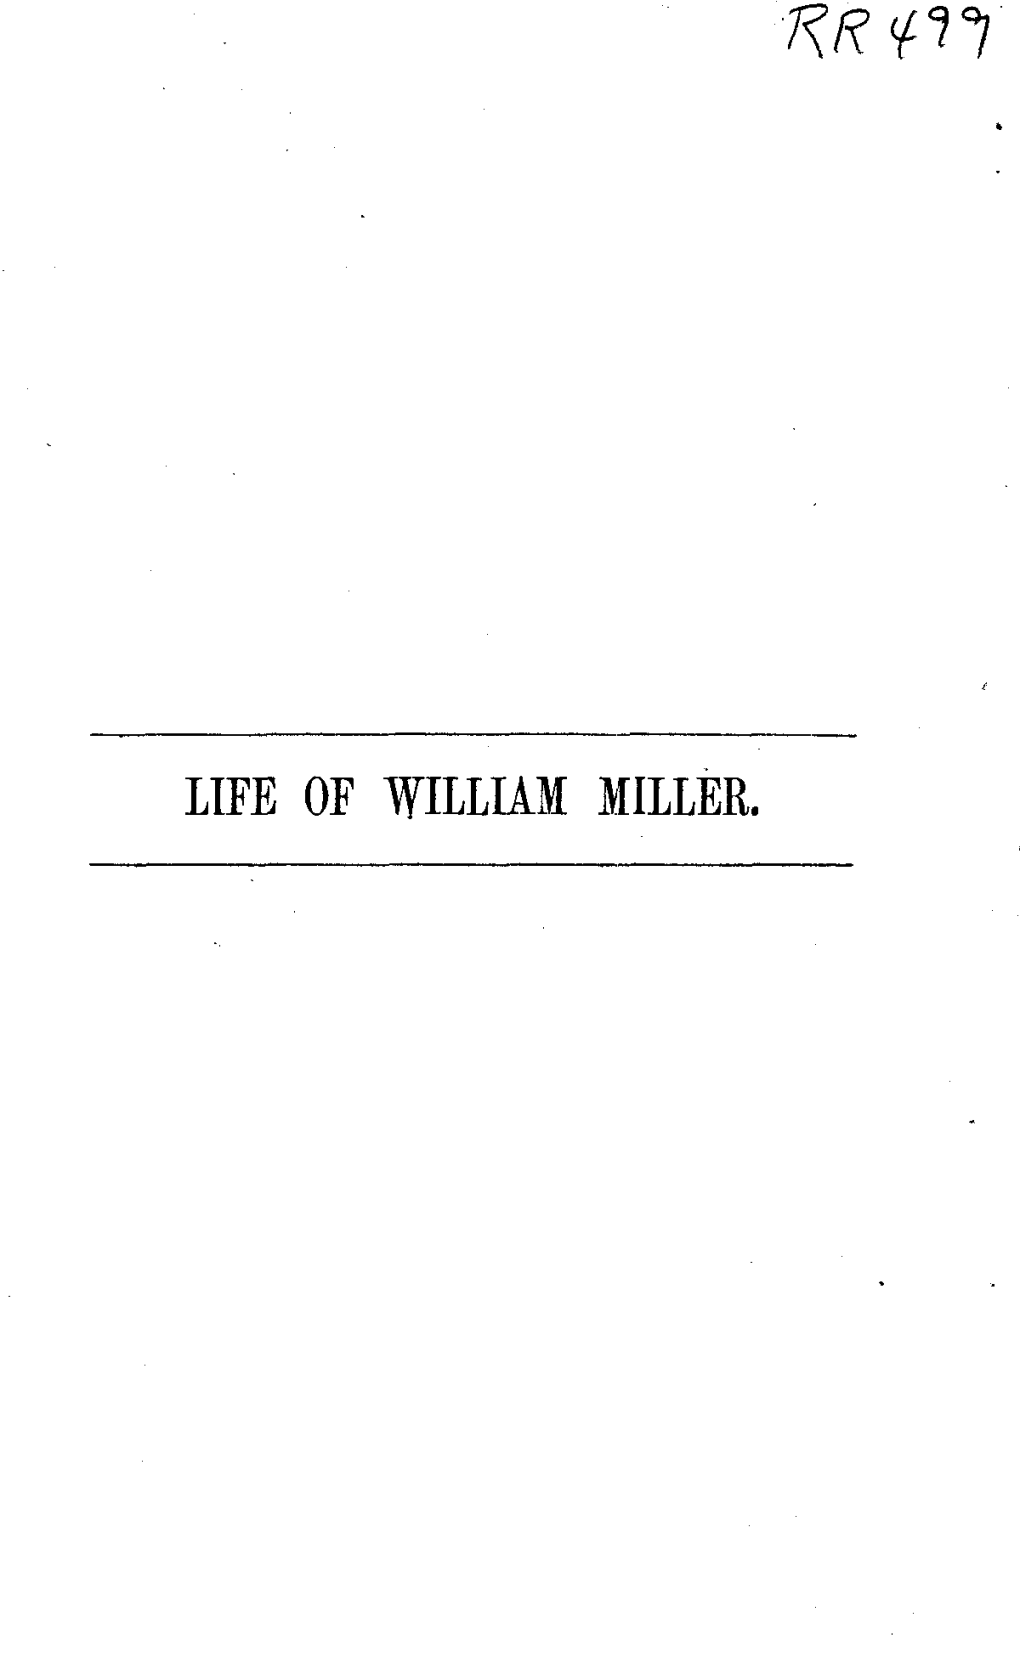 The Christian Life of William Miller